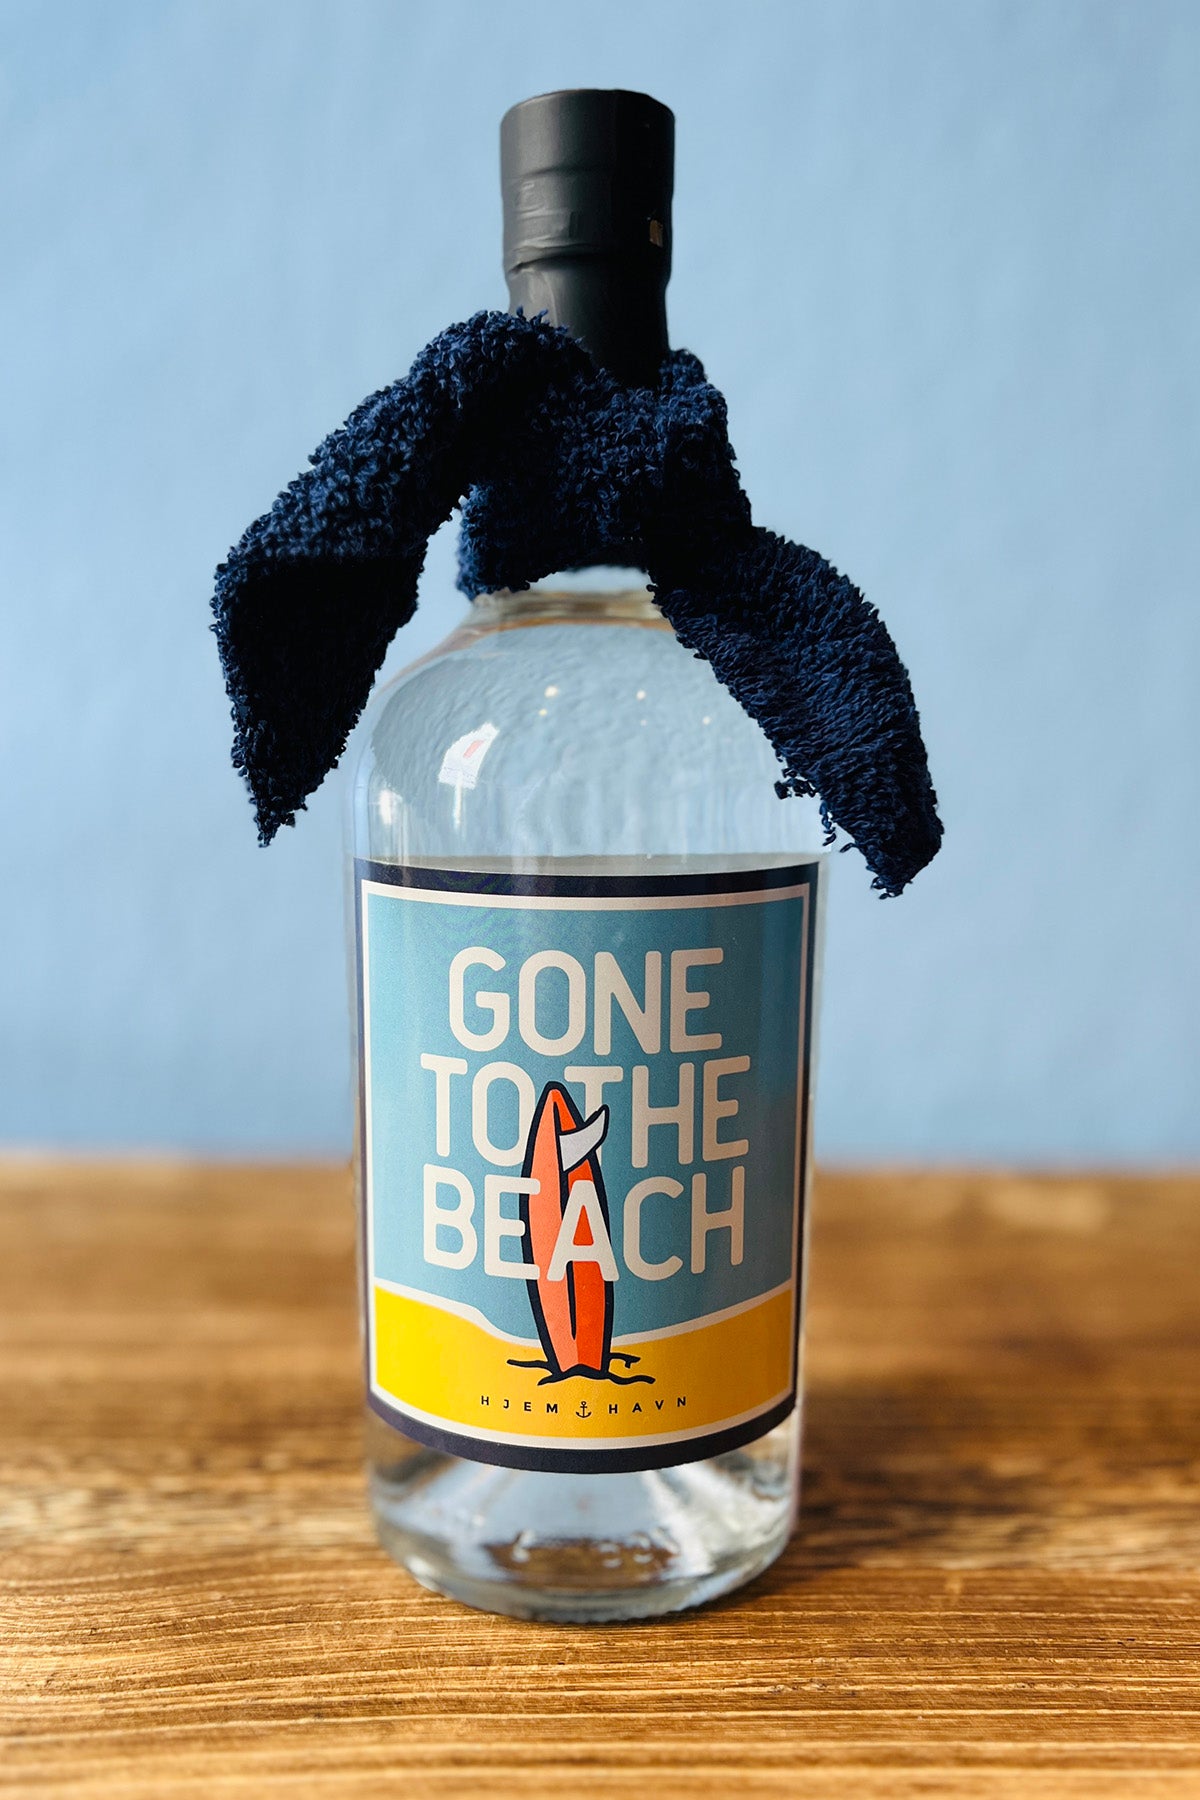 Gin - Gone to the beach